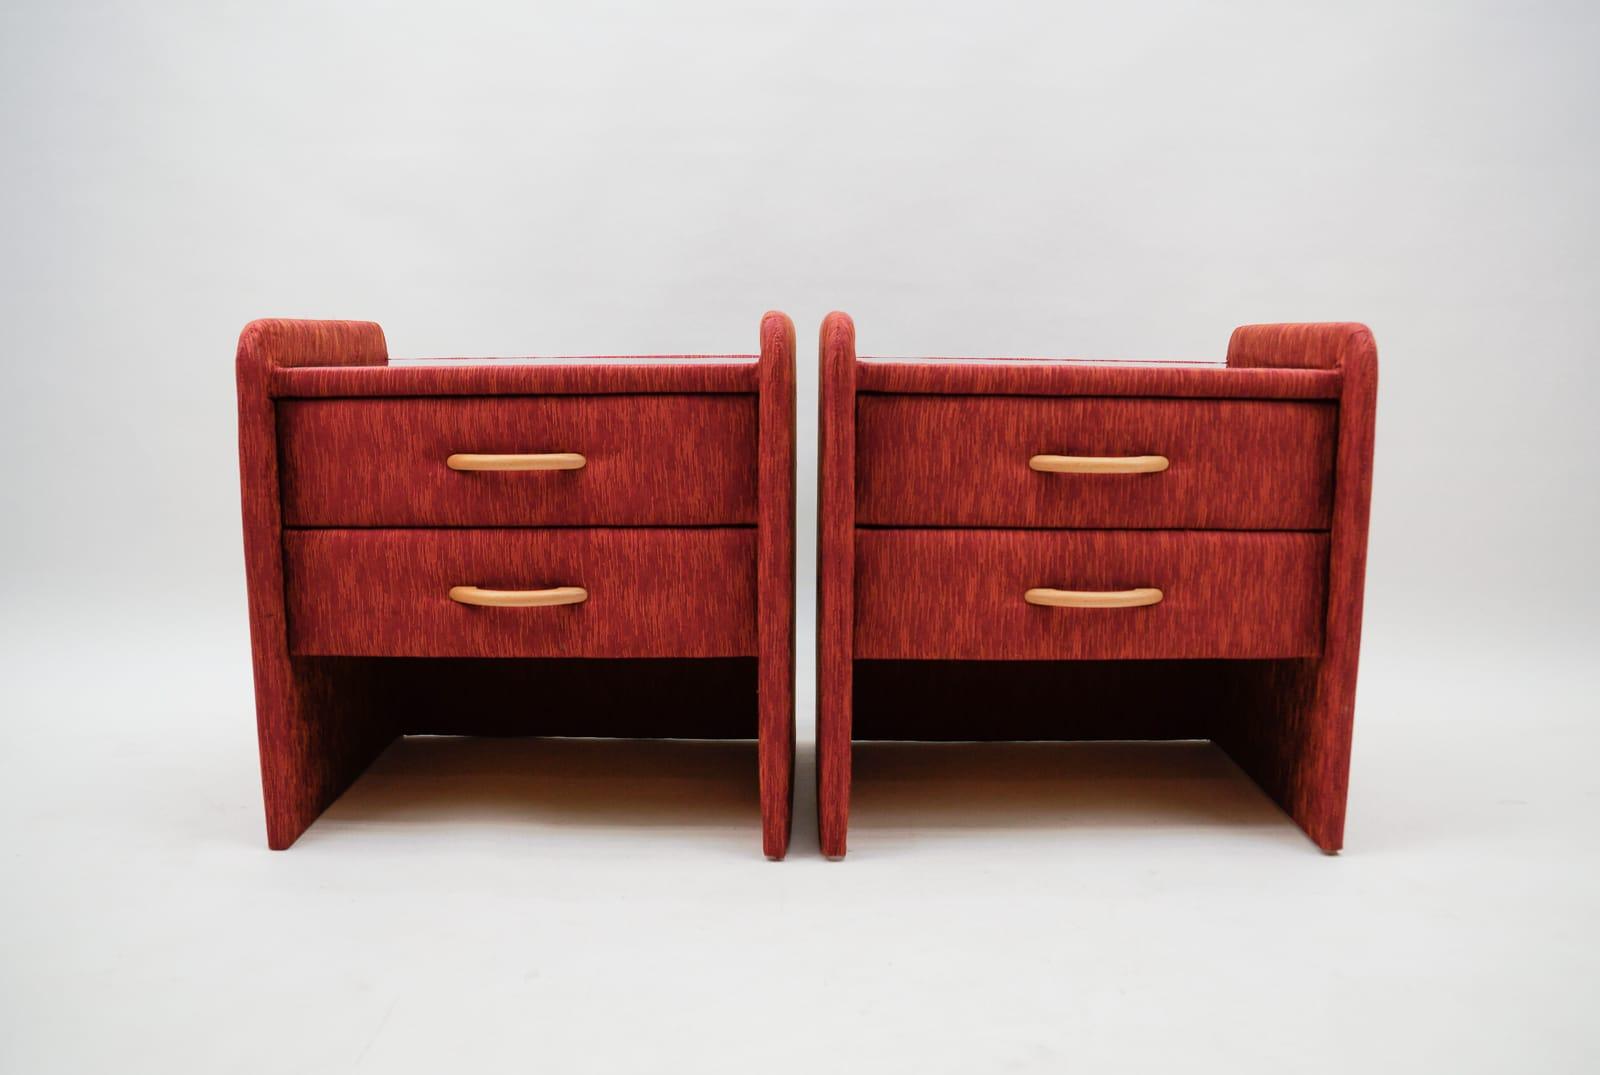 Pressed Two Fabric Upholstered Bedside Cabinets in Light Cherry Red and Glass, 1980s For Sale